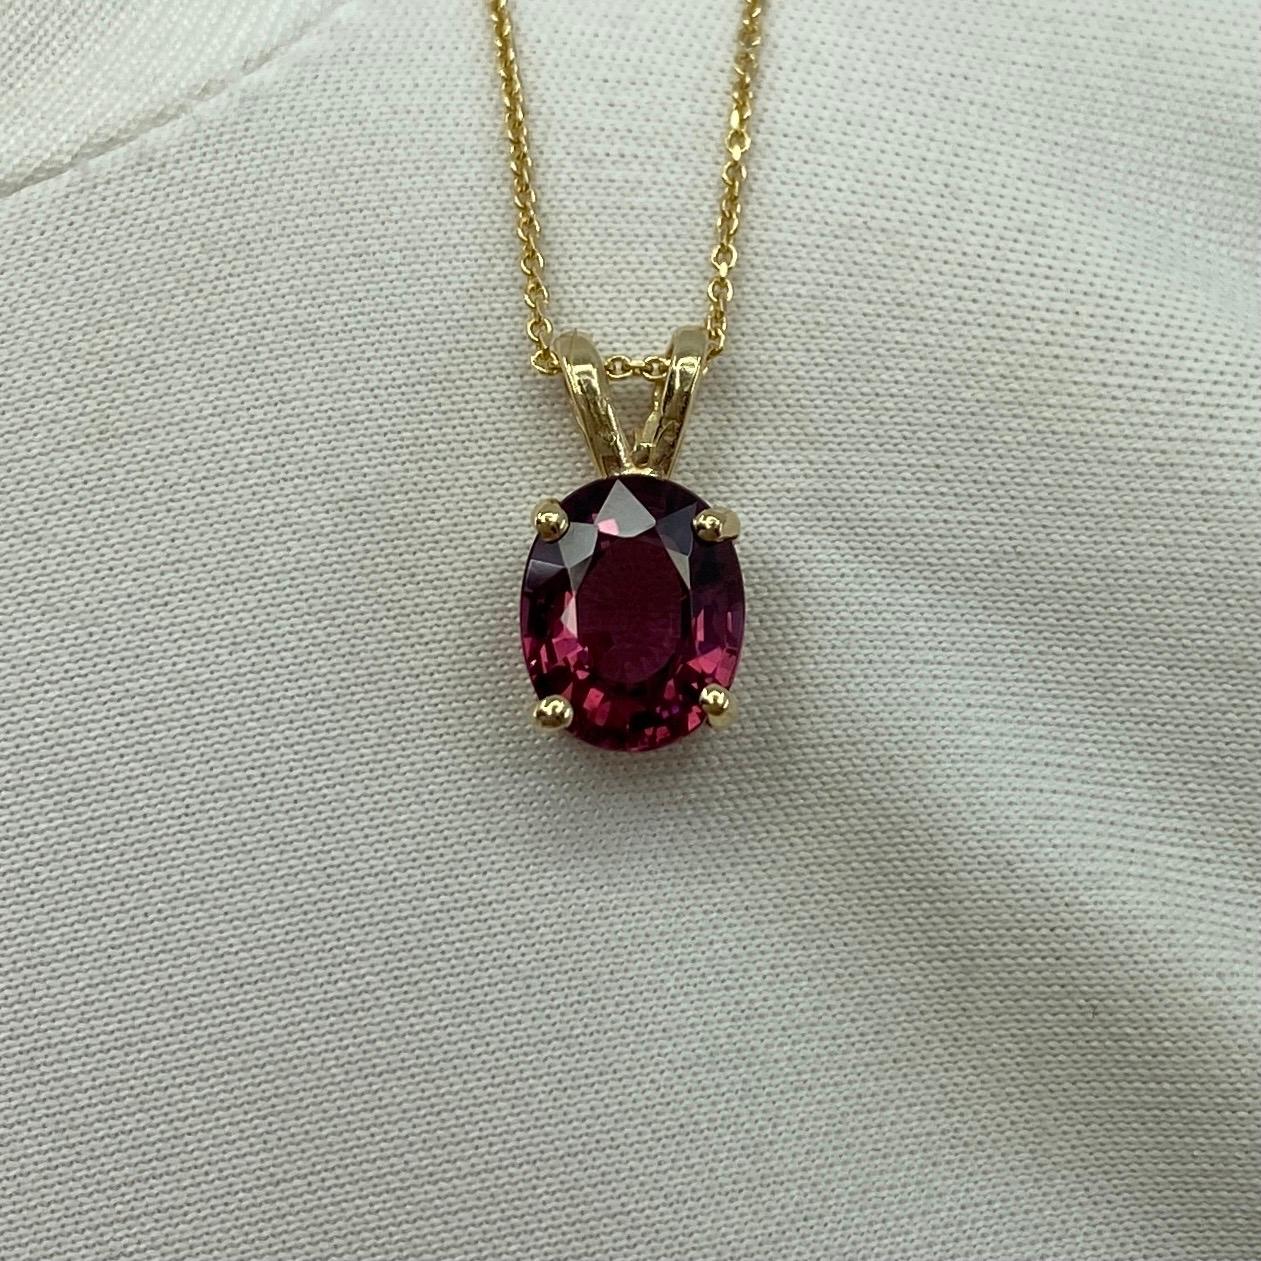 Vivid Pink Red Garnet Solitaire Pendant Necklace.

Beautiful 2.00 carat rhodolite garnet in a fine 14k yellow gold solitaire pendant. This gem has a stunning colour and excellent clarity. A very clean stone.
It also has an excellent oval cut which